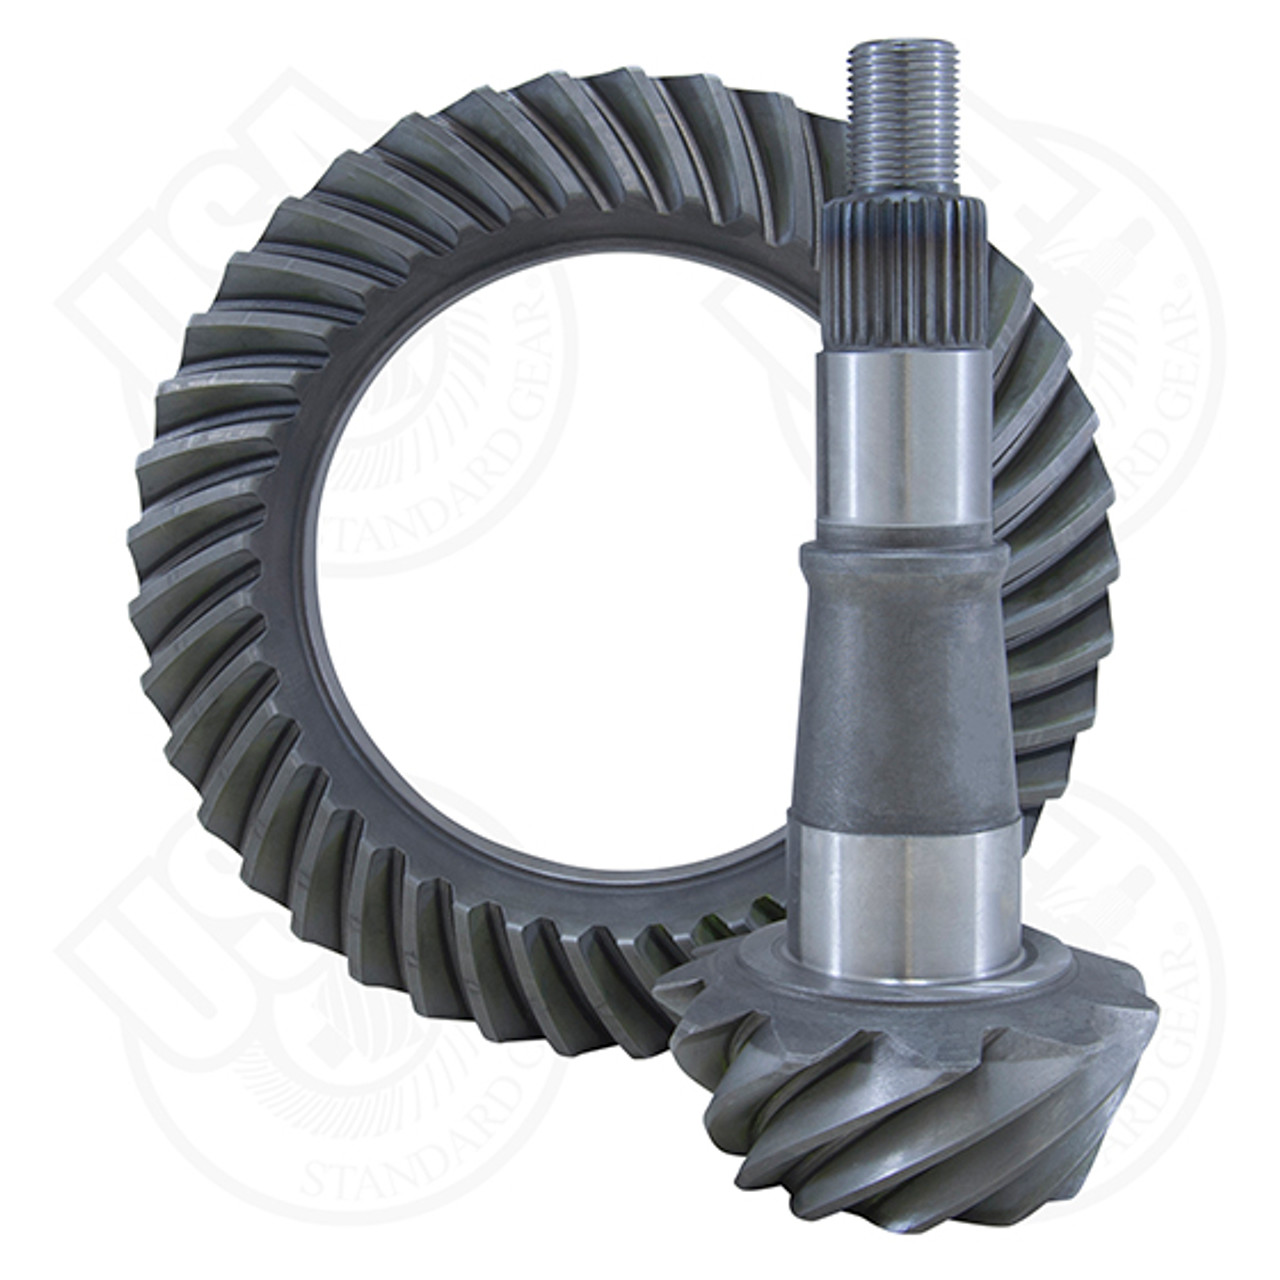 USA Standard Ring & Pinion gear set for GM 9.25" IFS Reverse rotation in a 3.42 ratio